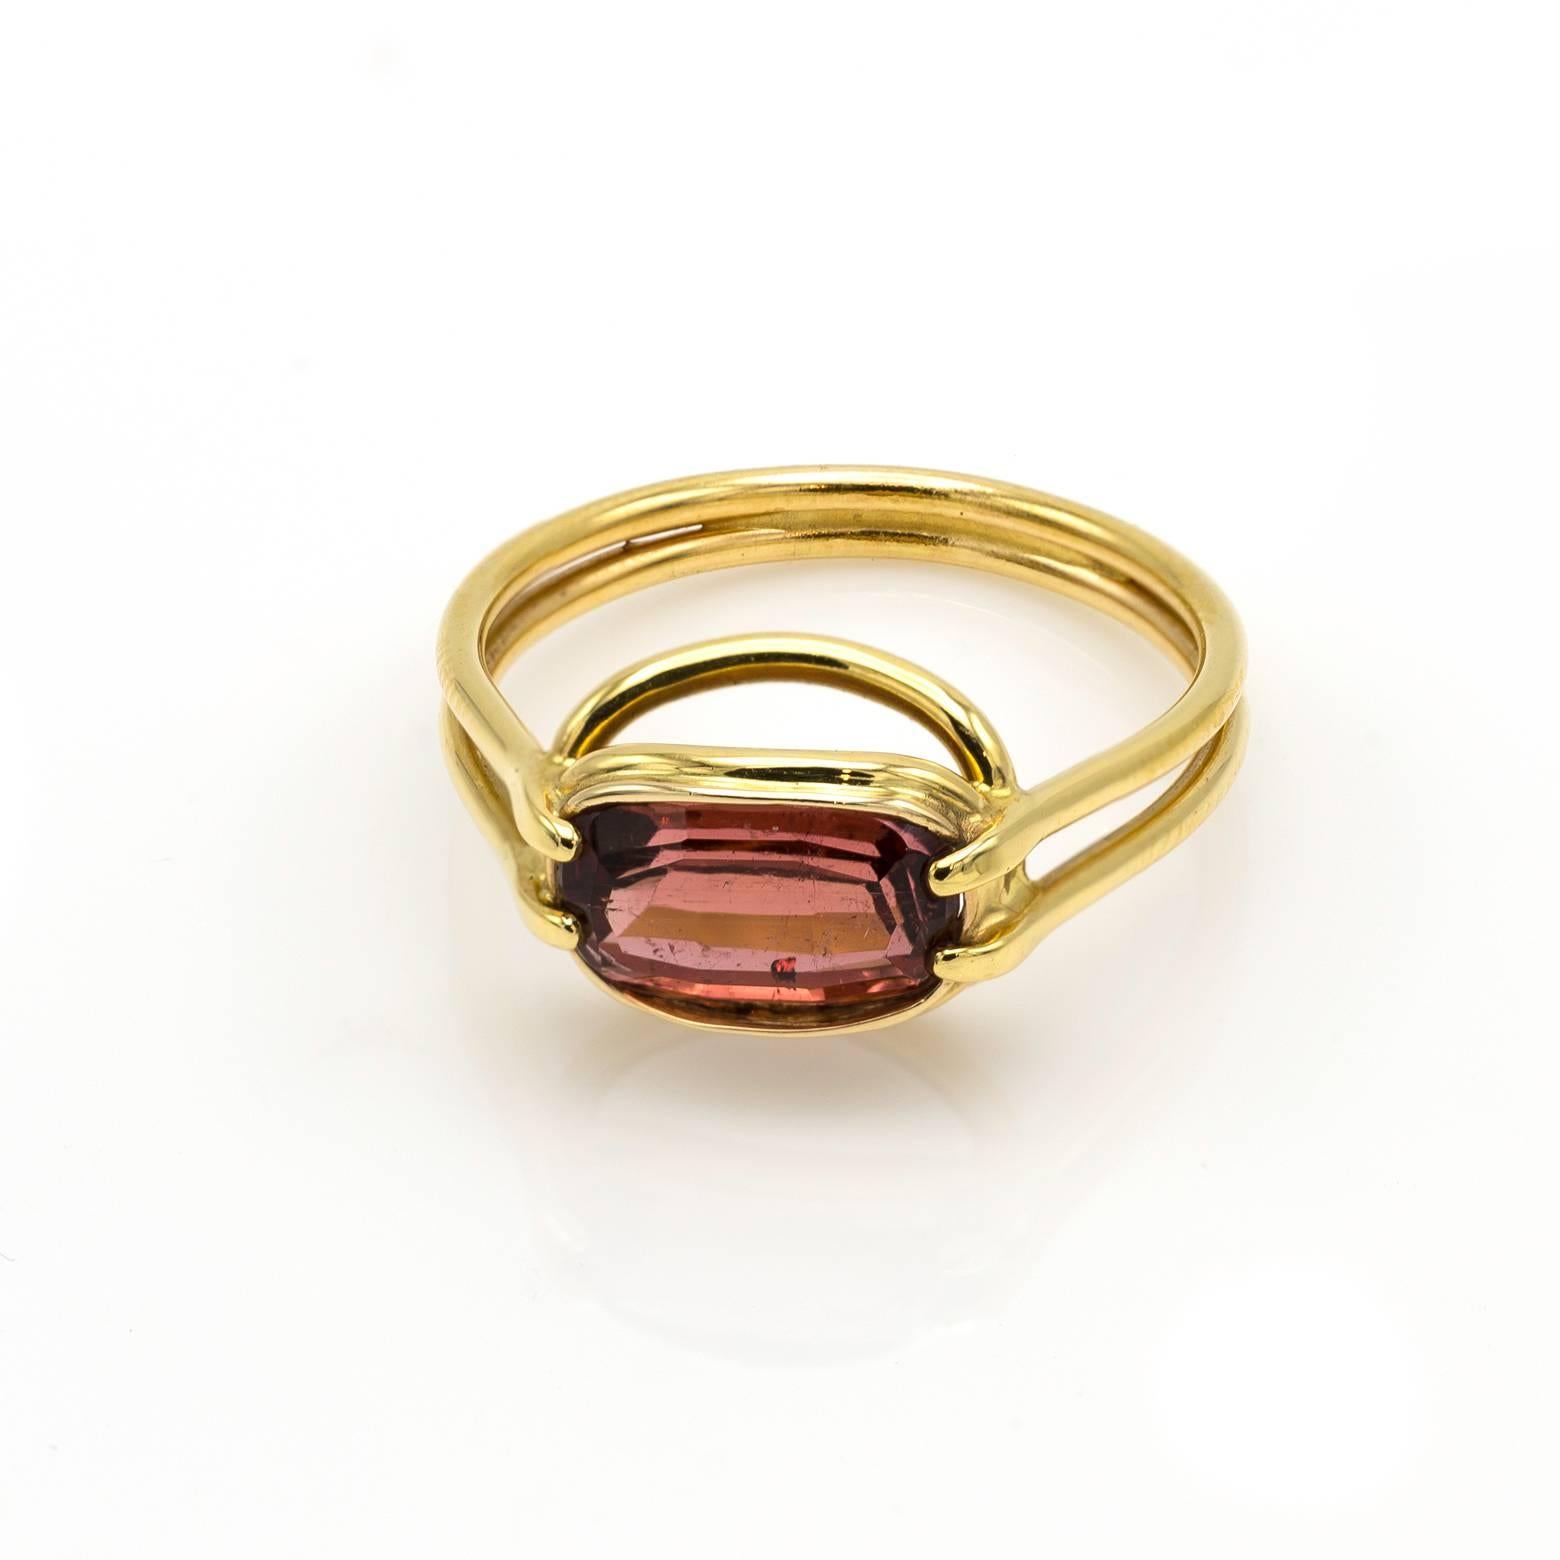 This square pink tourmaline ring is the perfect addition to any jewelry collection because it's gorgeous and unique design is one of a kind. Made here in our San Francisco Bay Area studio by one of our resident designers this makes a statement.